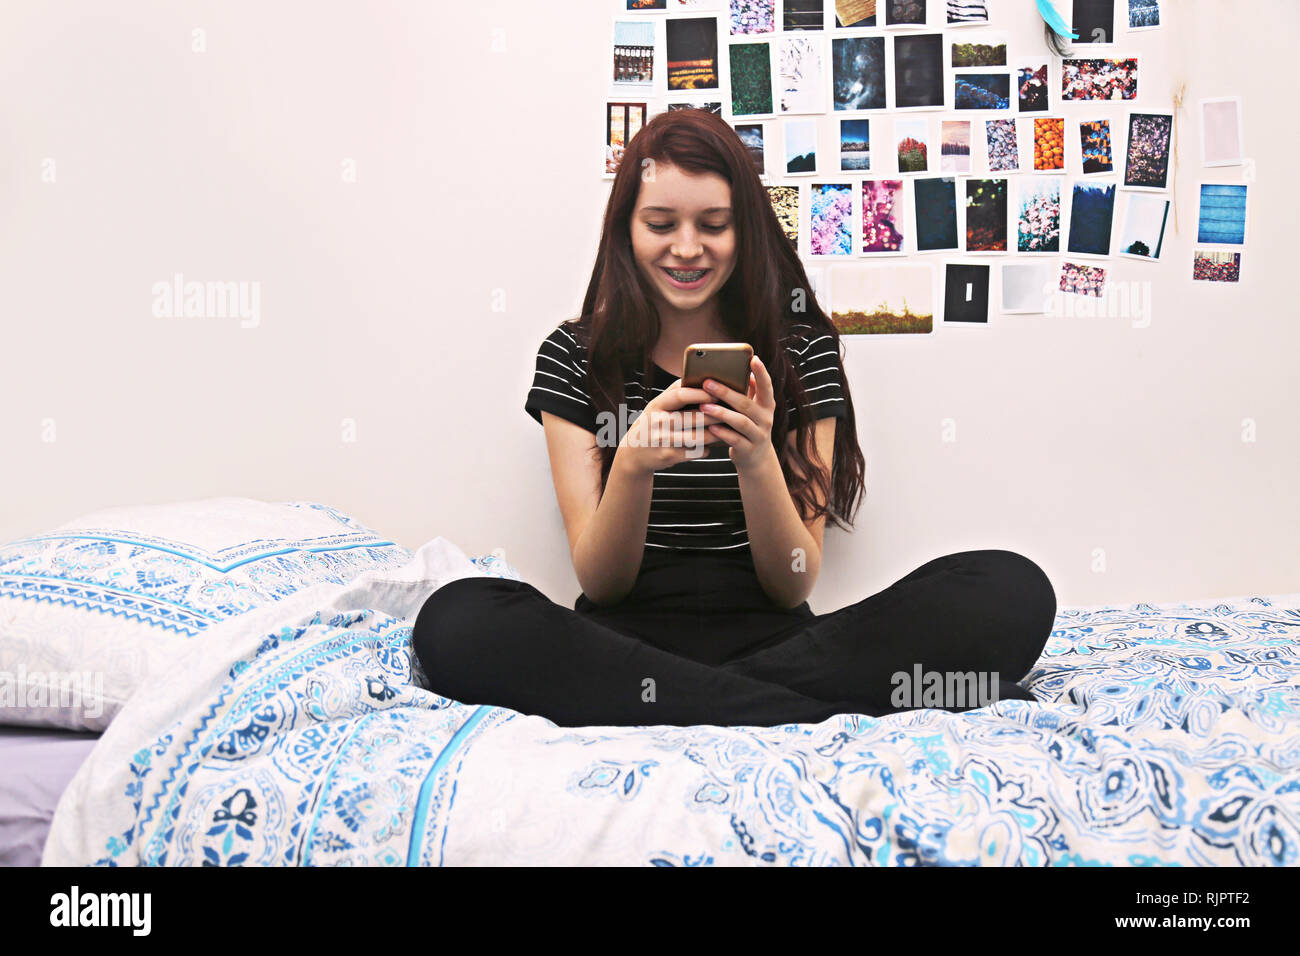 Teenager social networking on bed Stock Photo